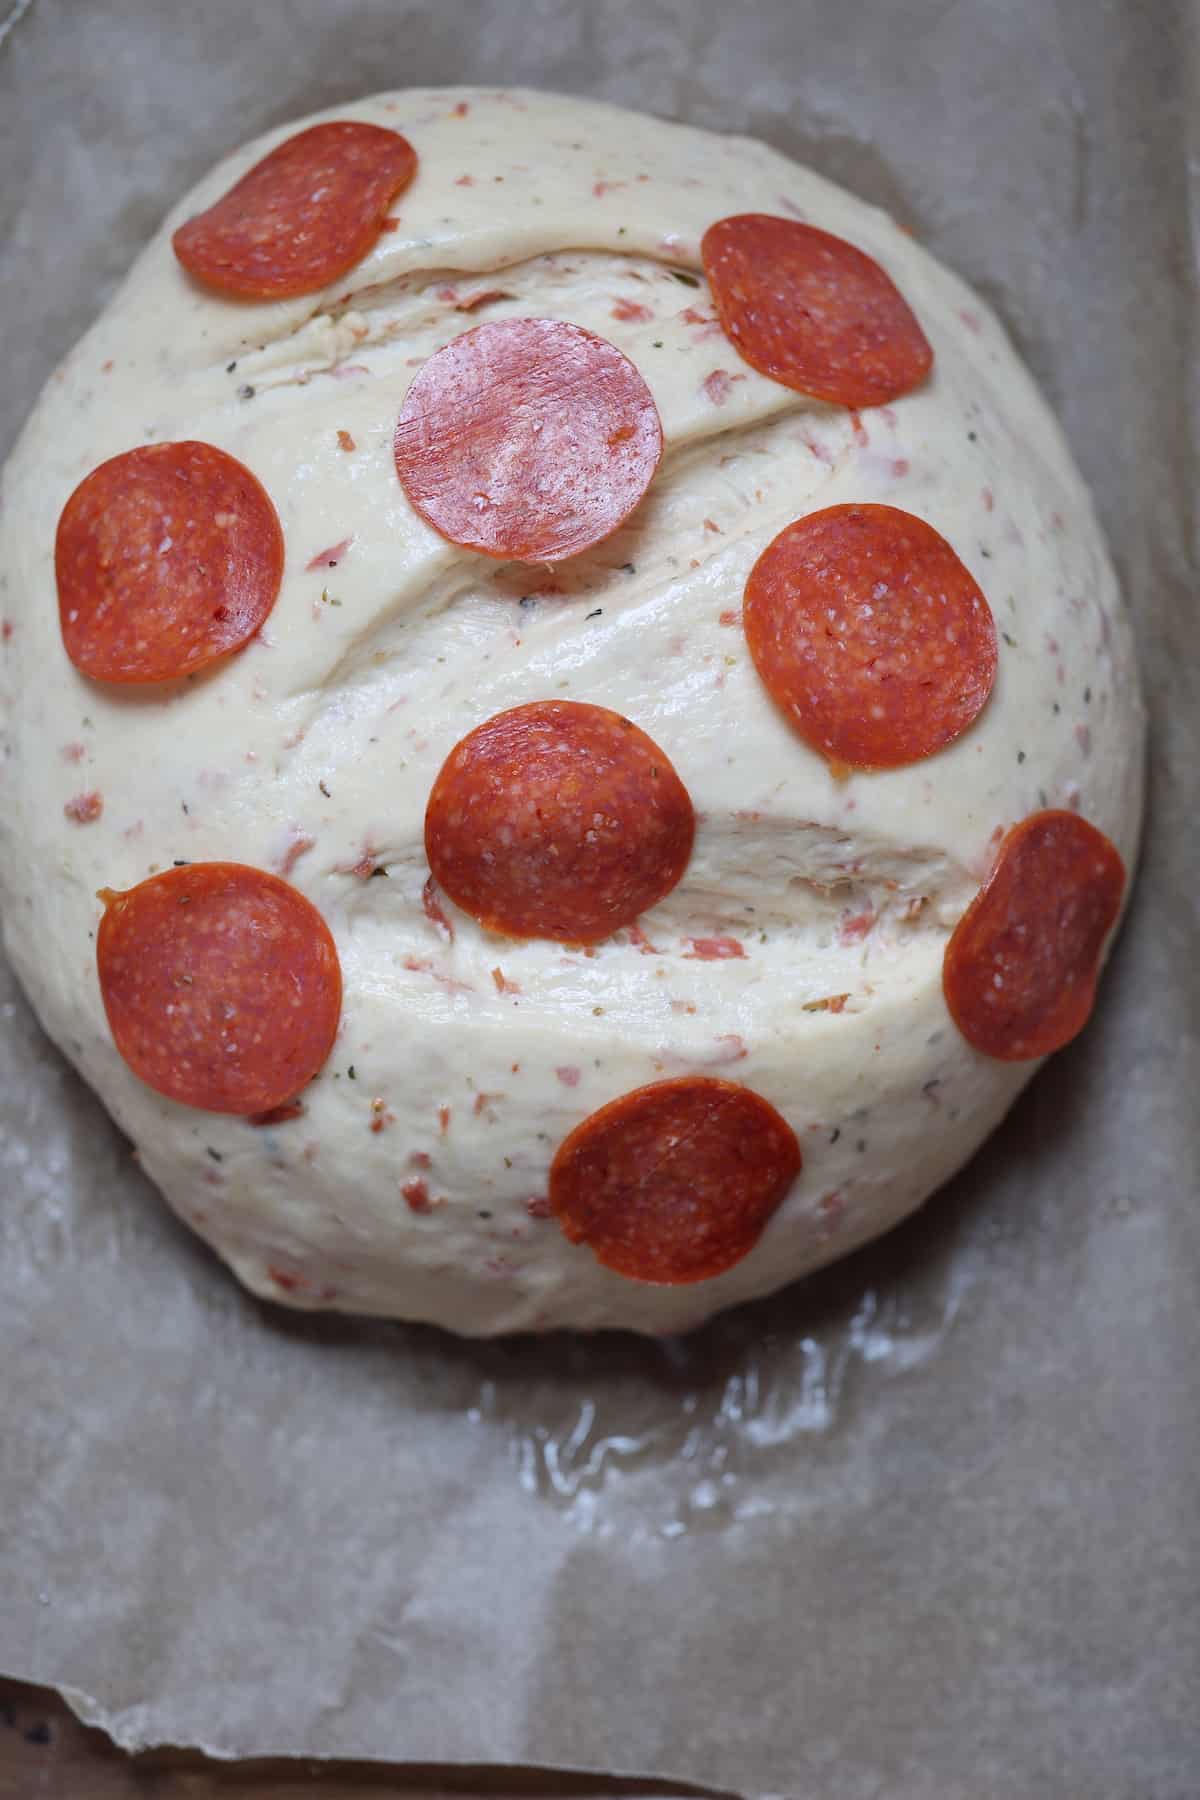 ball of dough with pepperoni slices on top